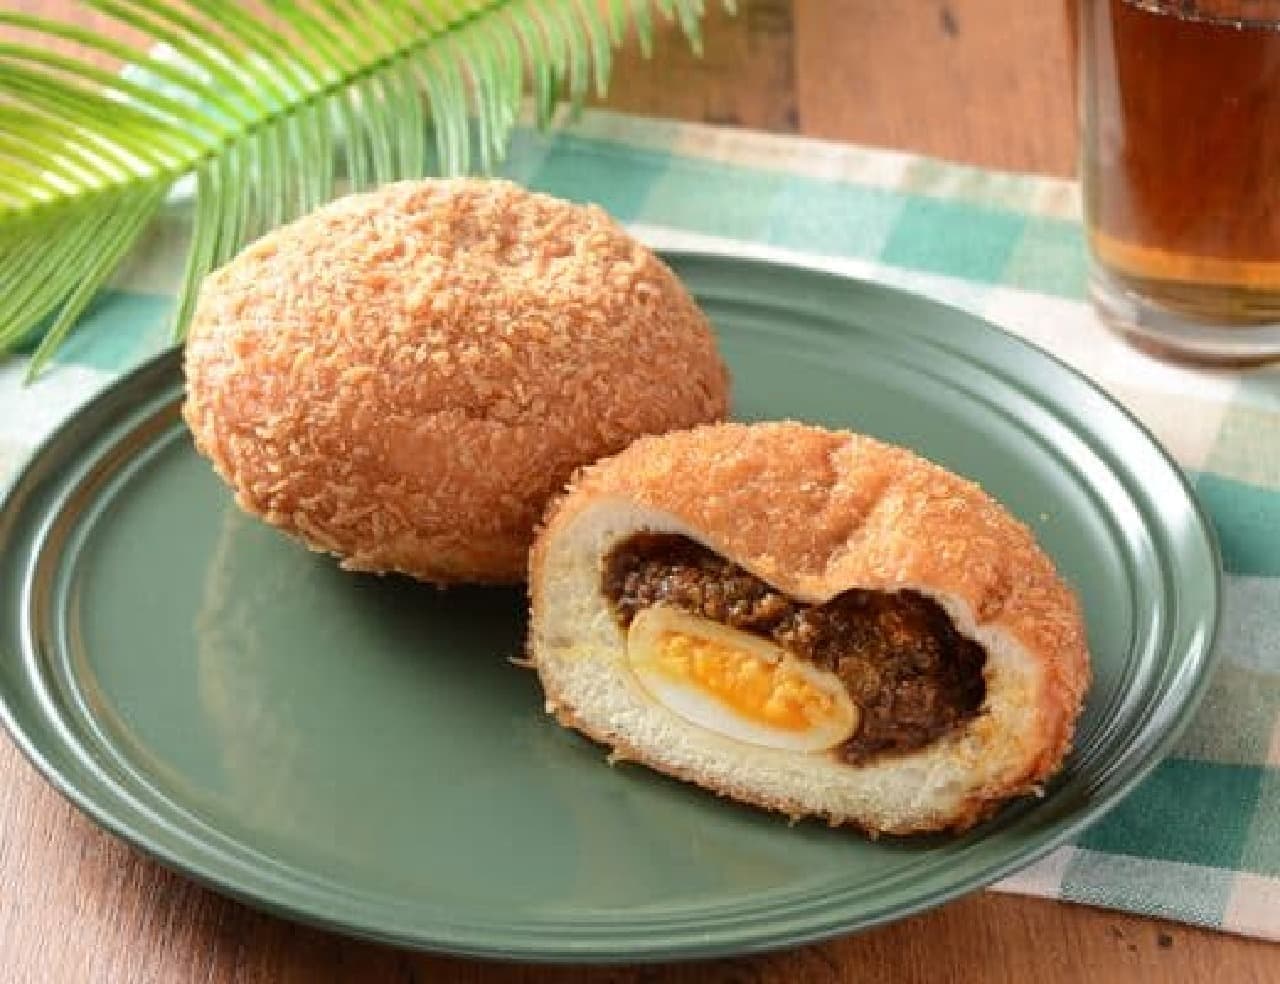 Lawson "Spicy! Curry bread with soft-boiled egg"